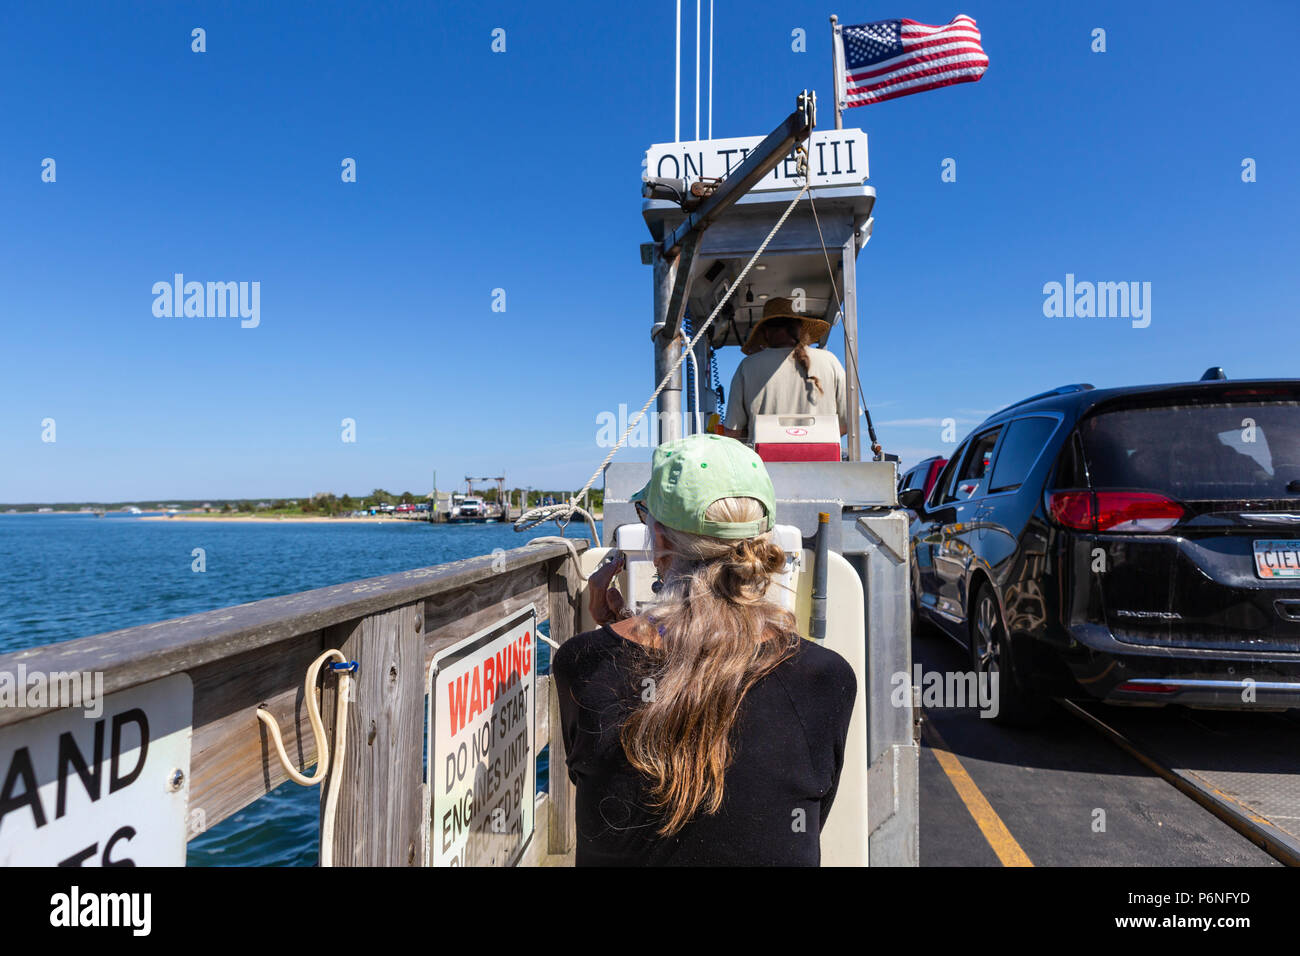 A woman enjoys the view from the Chappy Ferry on the short ride to Chappaquiddick Island from downtown Edgartown, Massachusetts on Martha's Vineyard. Stock Photo